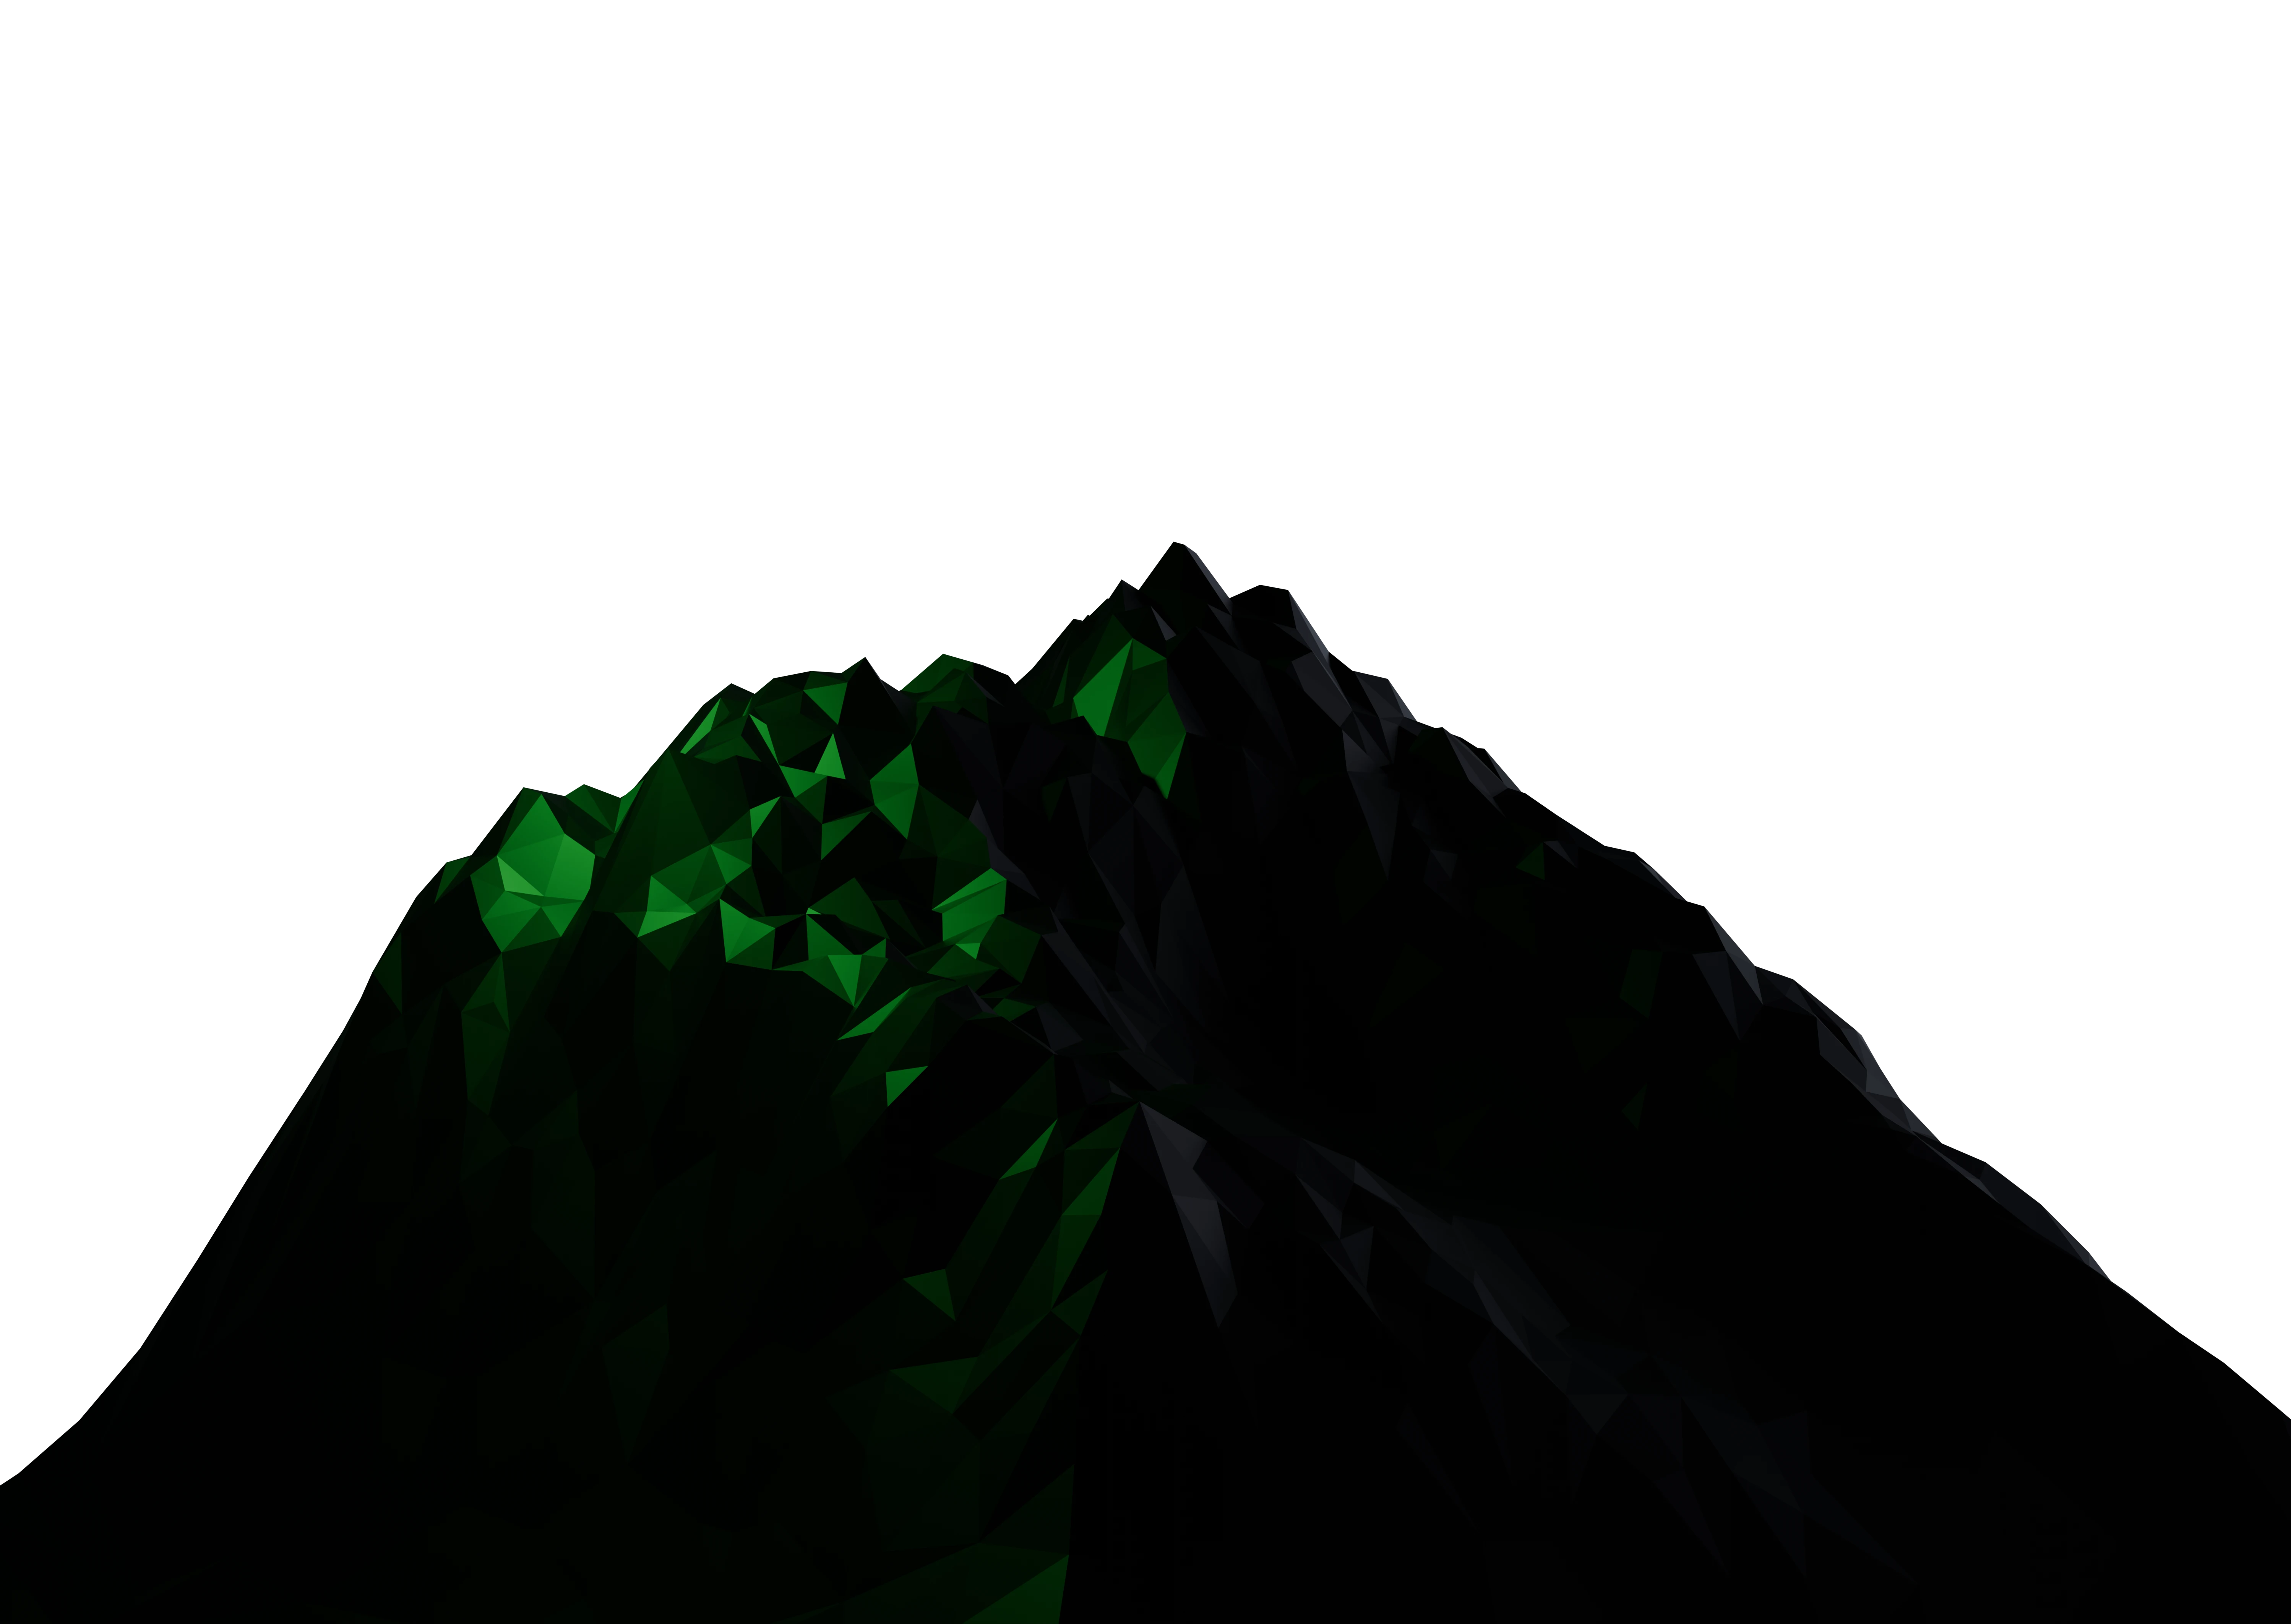 A transparent image of a low-poly 3D mountain made by me, Terrell Turner. One side is illuminated by sunlight, the other side is lit by a peaceful green glow.